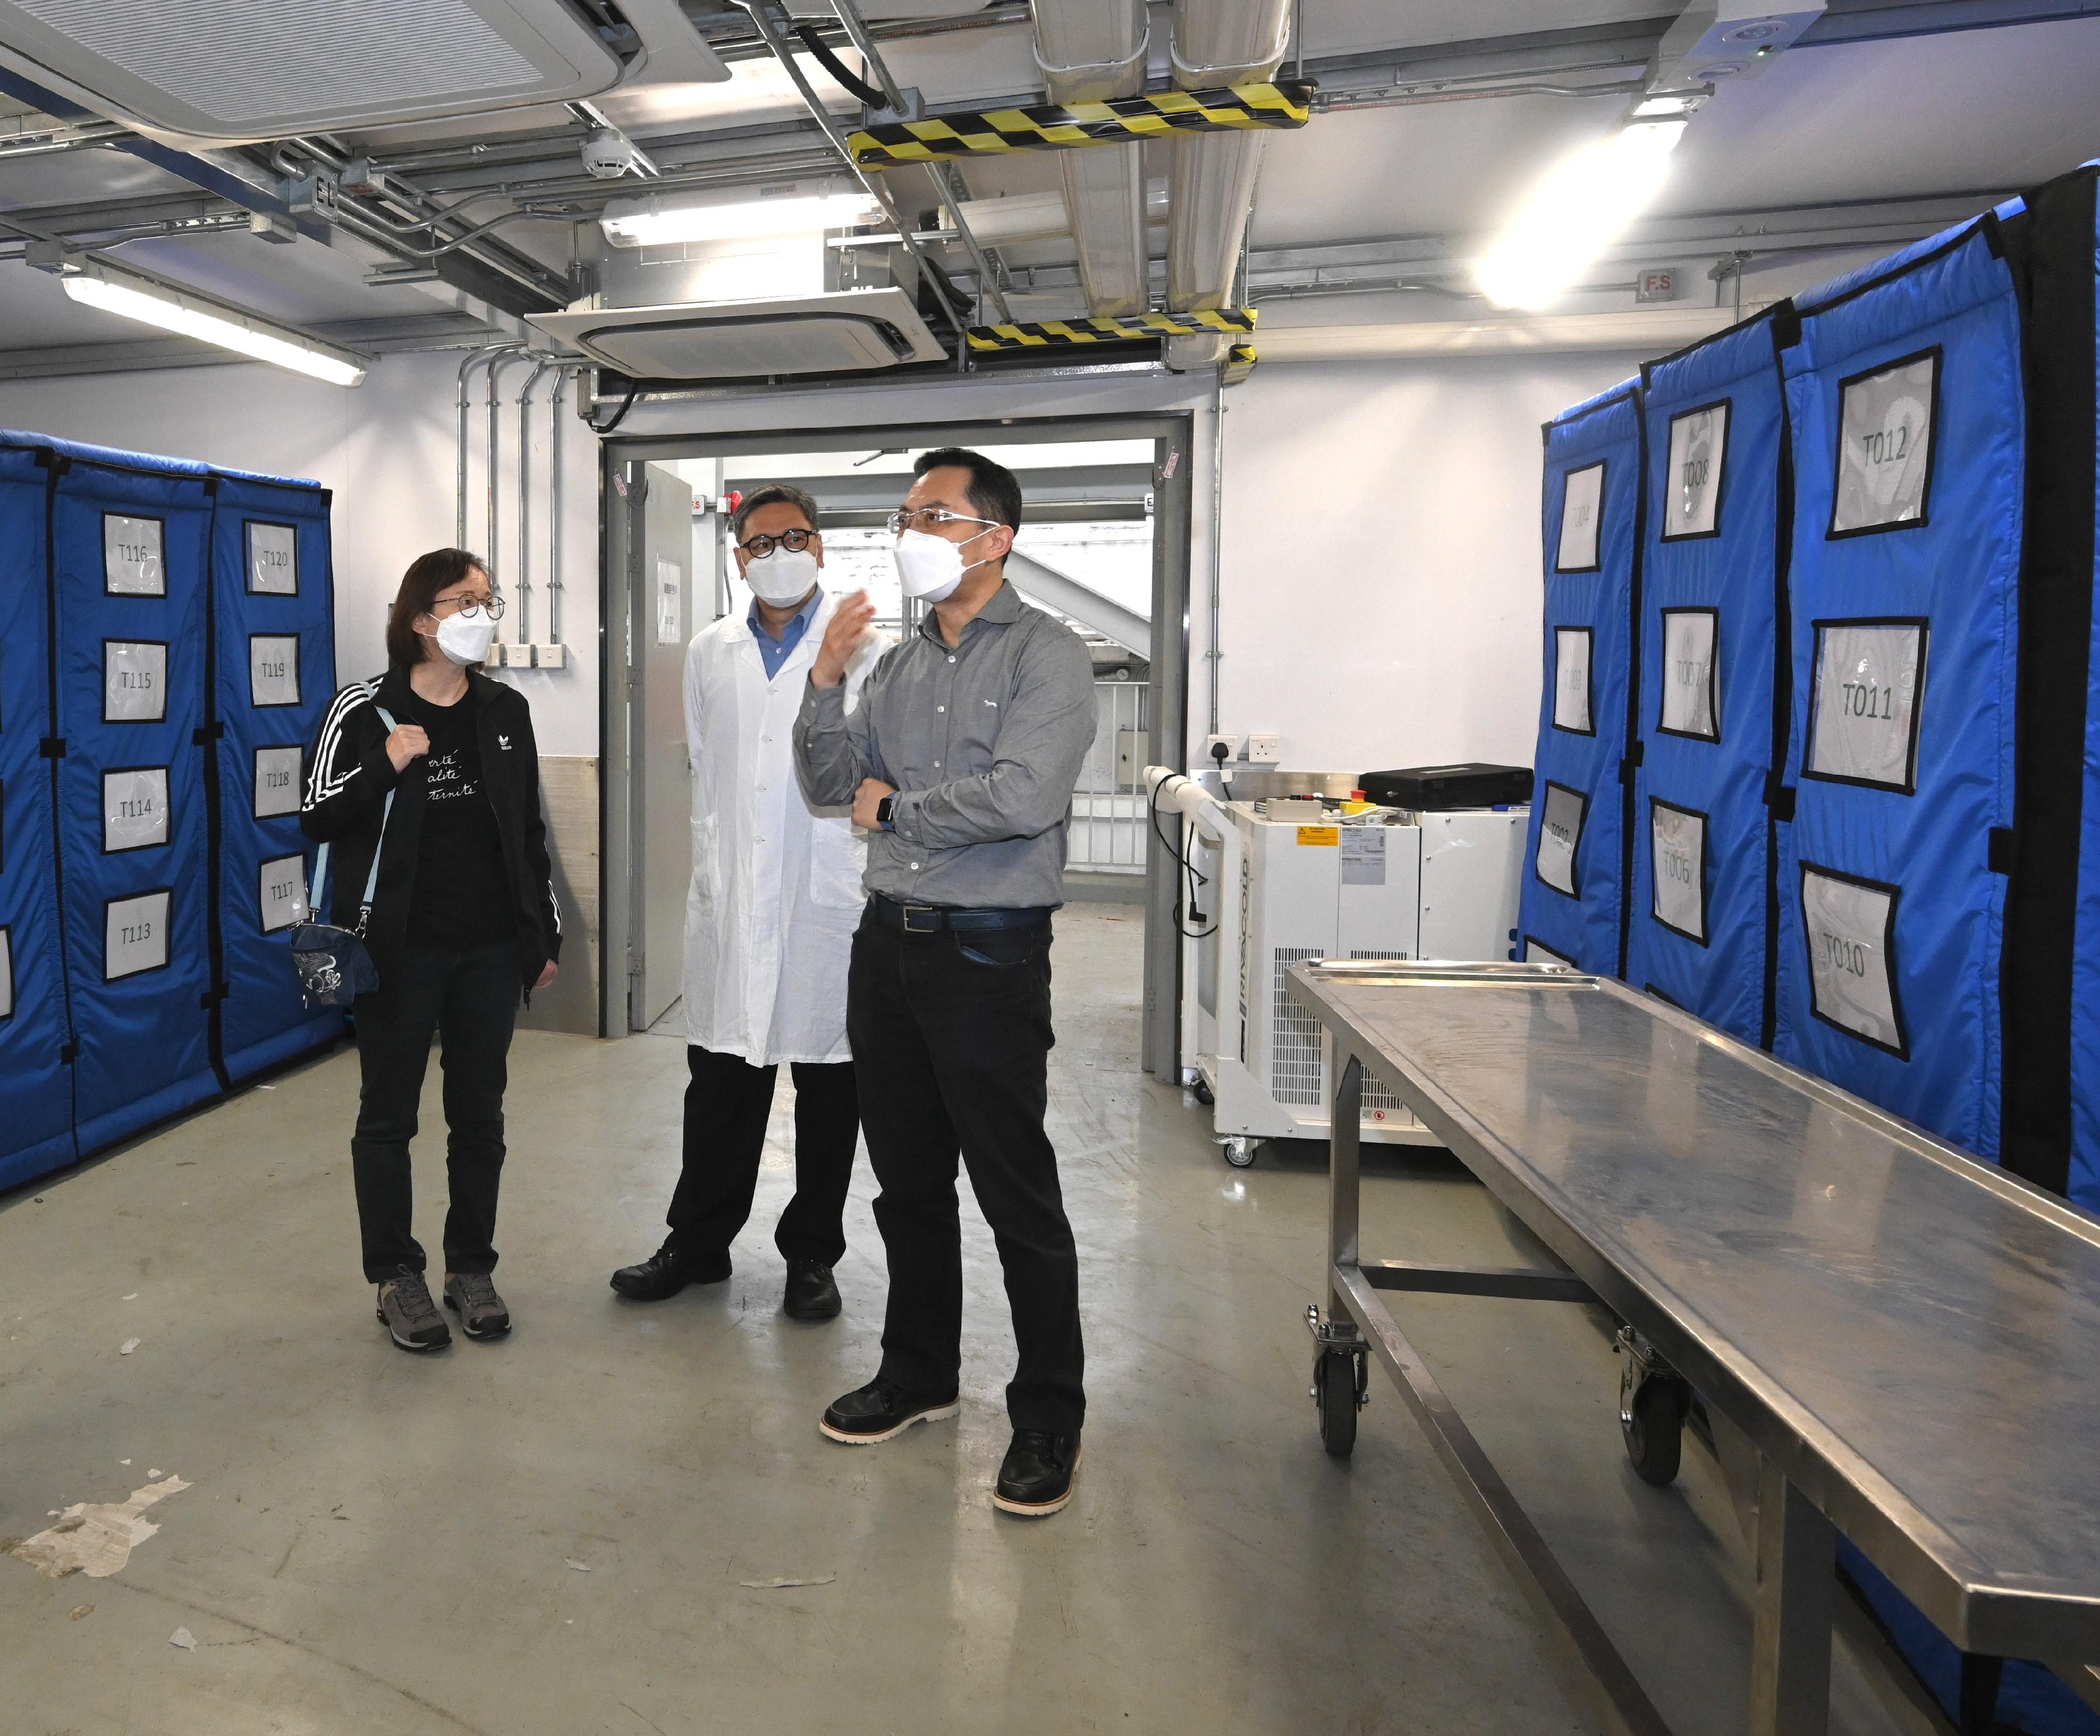 The Kowloon Public Mortuary, re-opened since the fifth wave of the epidemic, has installed 20 mobile units, providing an additional 240 storage spaces. Photo shows the Director of Health, Dr Ronald Lam (right), accompanied by the Controller of Regulatory Affairs of the Department of Health (DH), Dr Amy Chiu (left), and the Consultant Forensic Pathologist of the DH, Dr Lai Sai-chak (centre), today (March 27) inspecting the newly-installed mobile units.